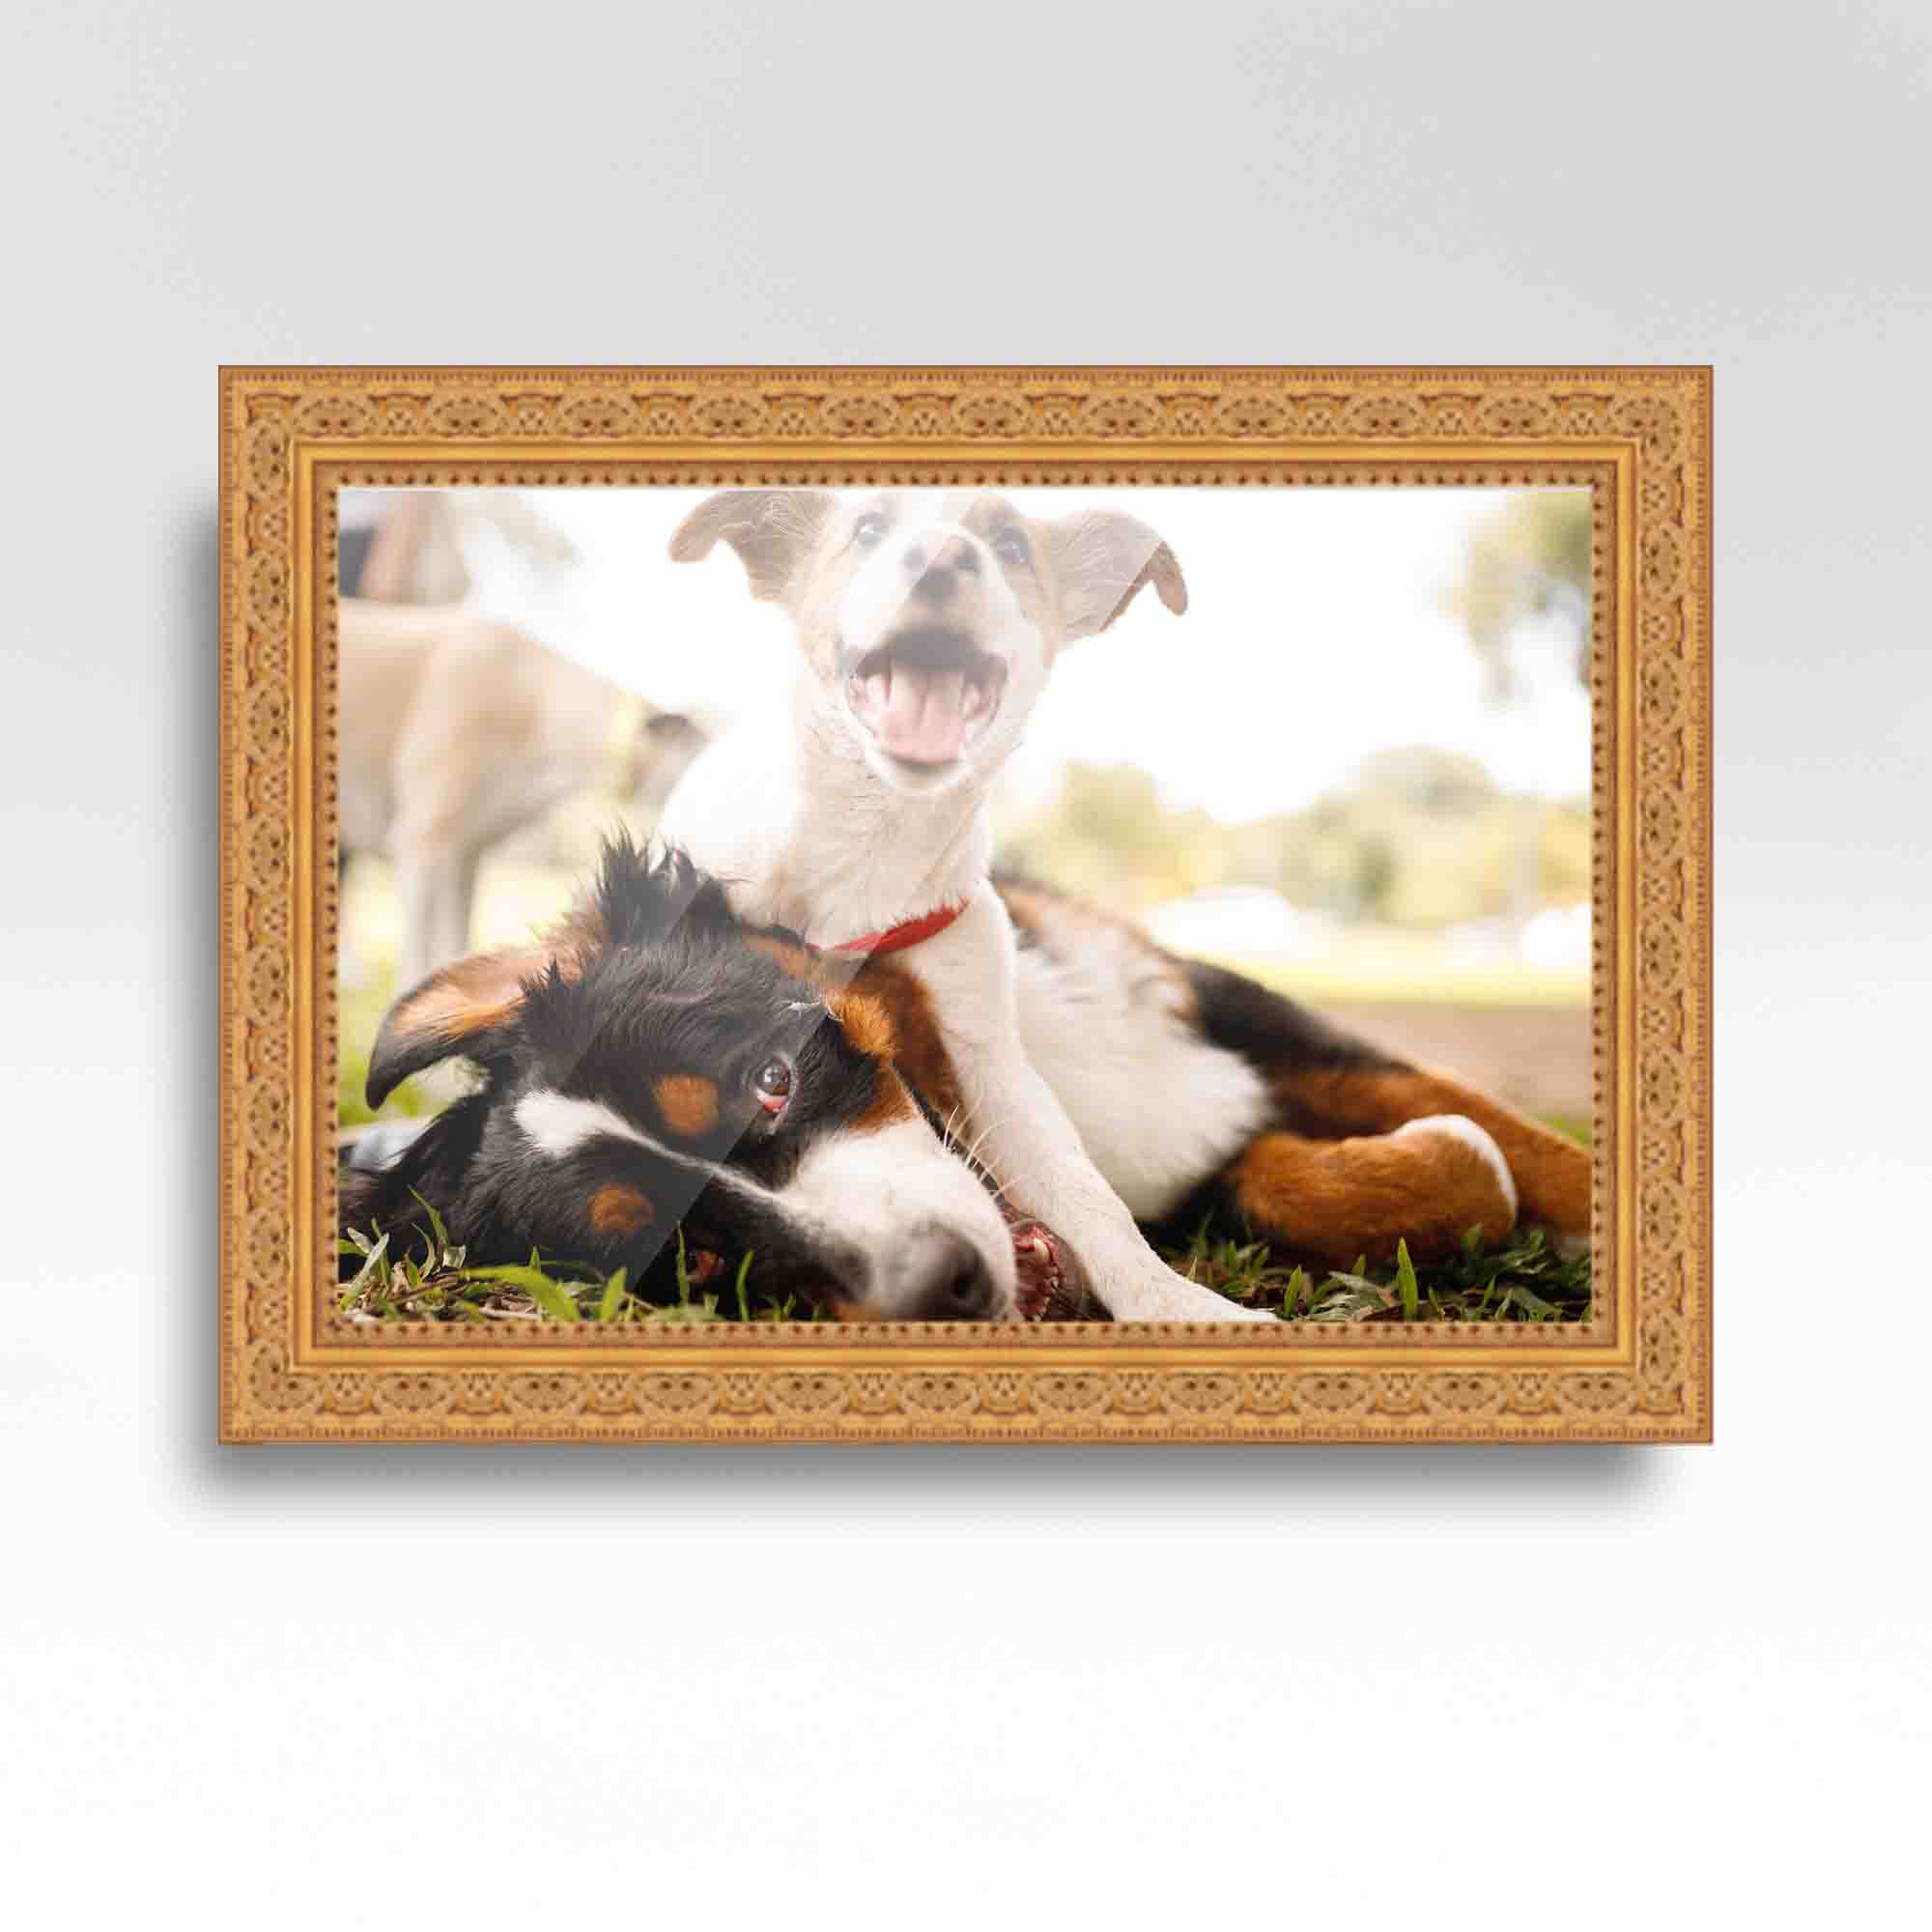 CustomPictureFrames.com 14x22 Gold Picture Frame - Wood Picture Frame Complete with UV Acrylic, Foam Board Backing & Hanging Hardware